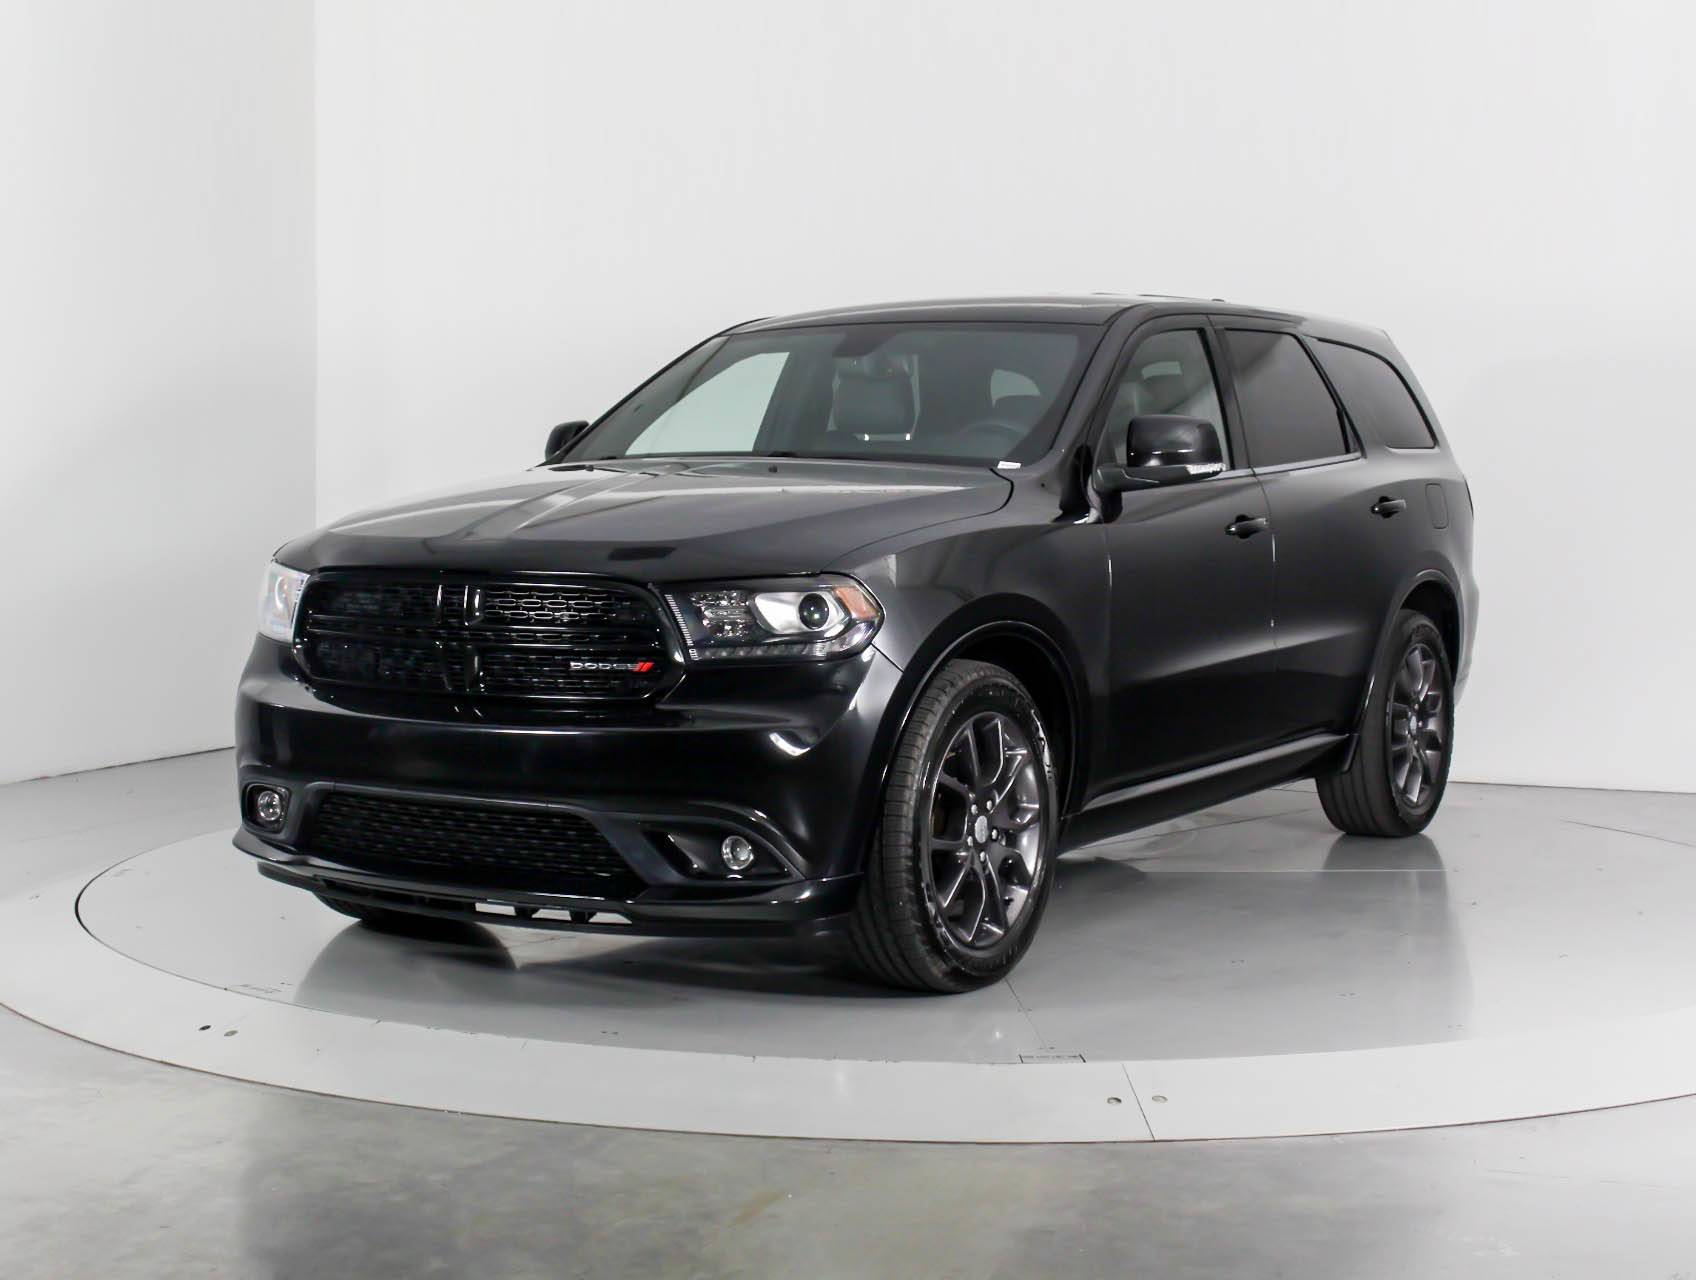 Used 2015 DODGE DURANGO R/t for sale in WEST PALM | 100681